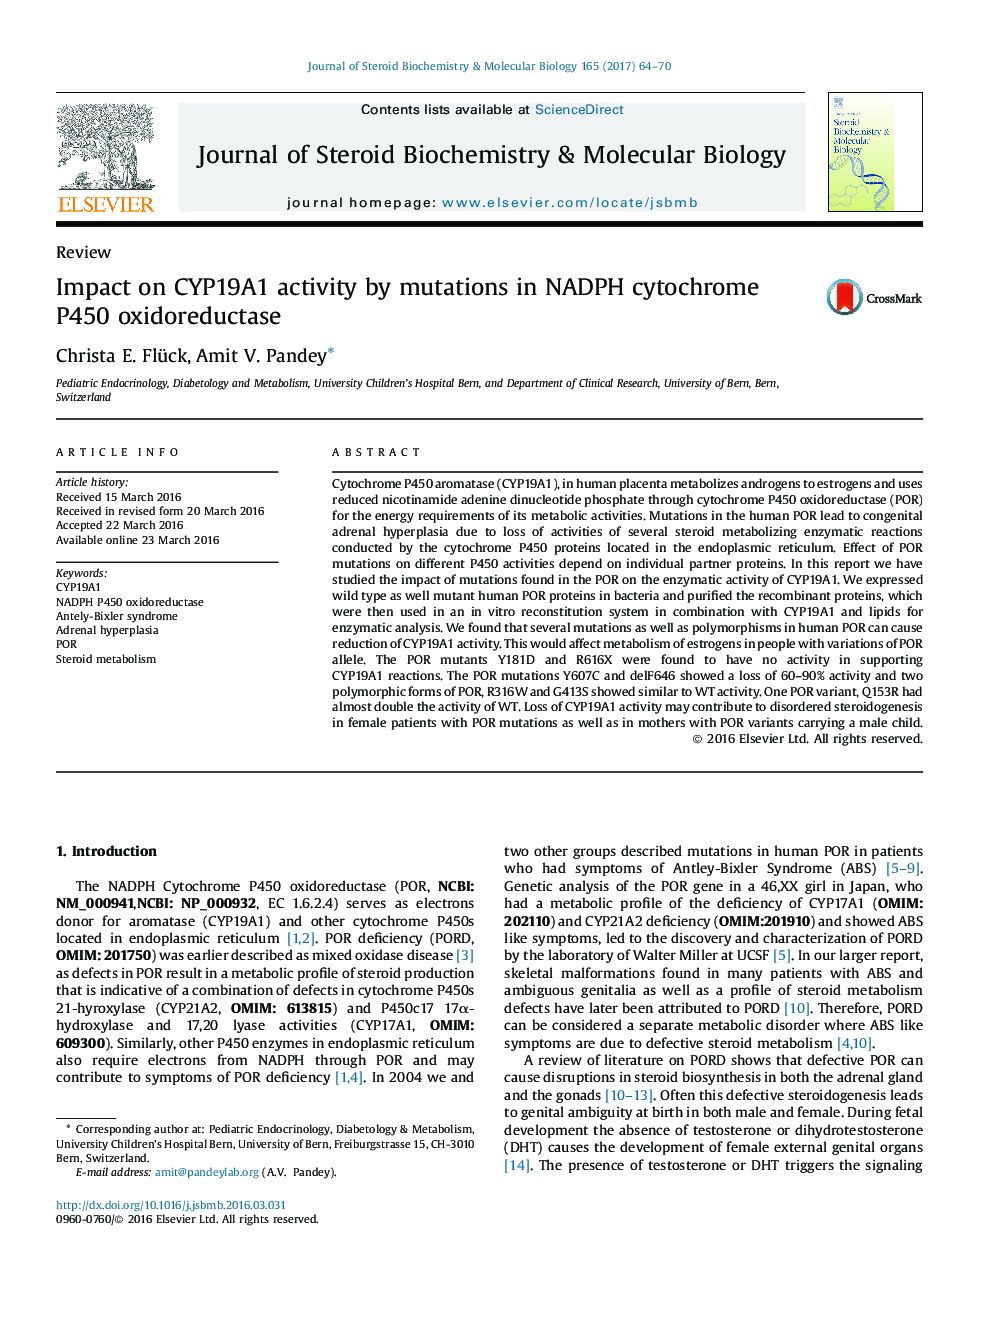 ReviewImpact on CYP19A1 activity by mutations in NADPH cytochrome P450 oxidoreductase